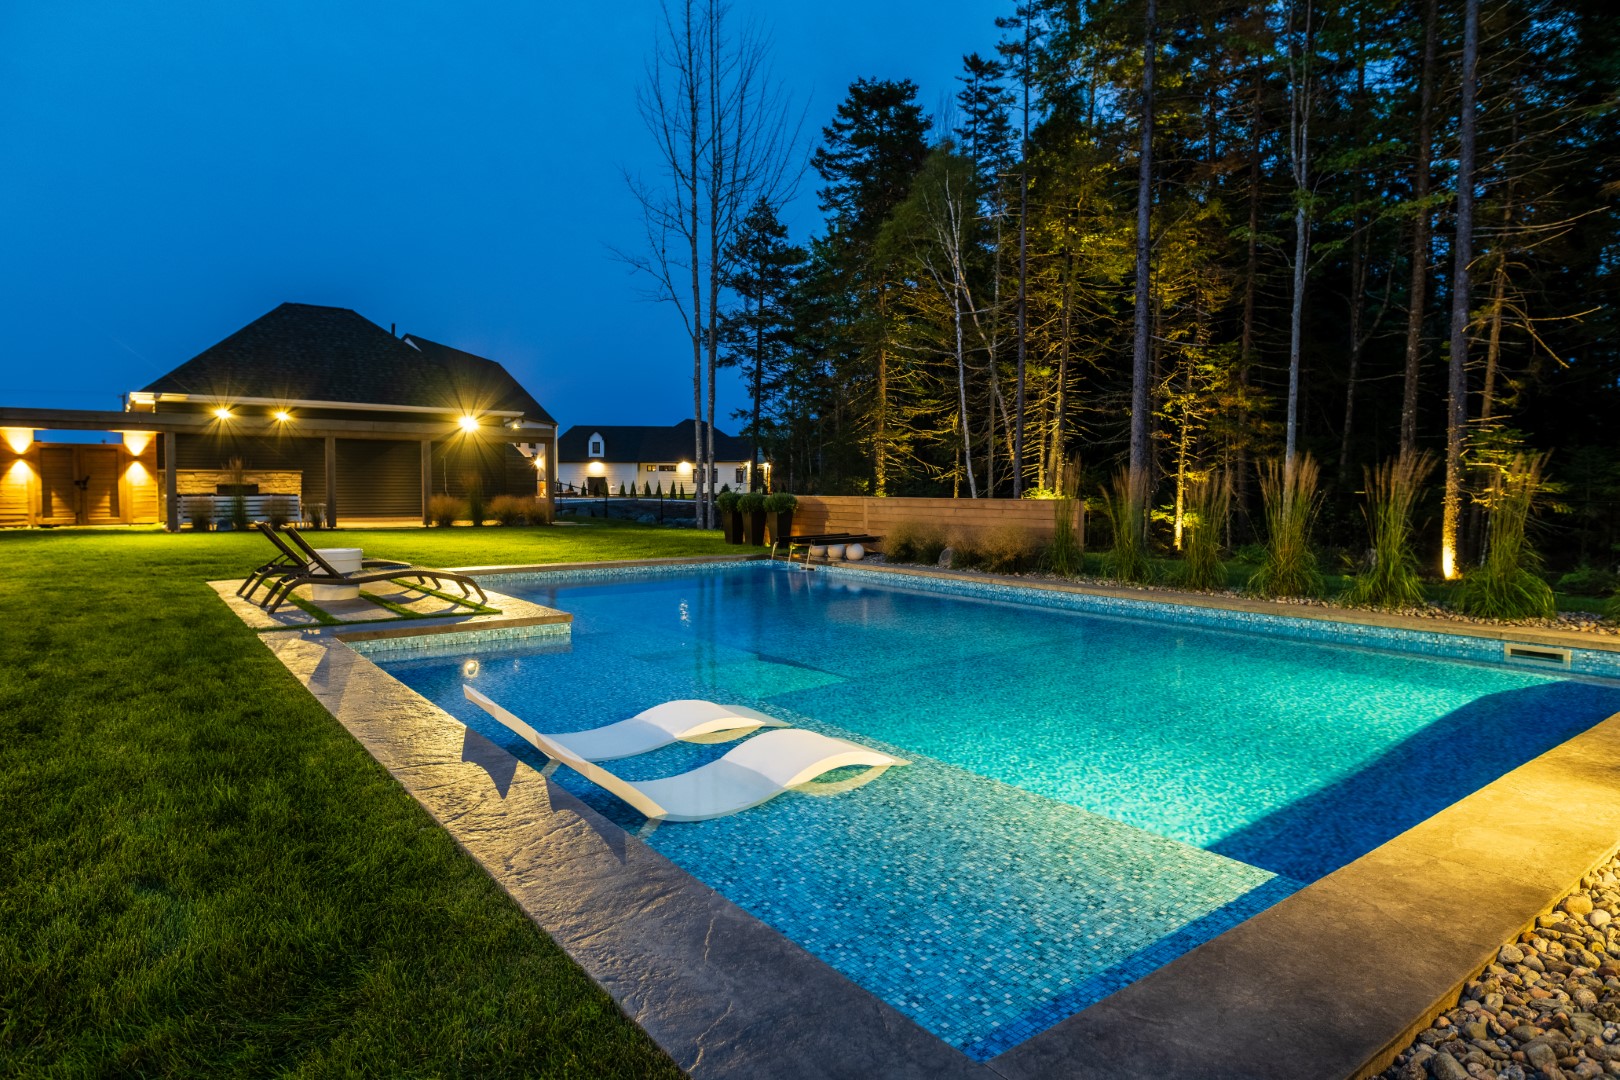 Commericial outdoor pool at night with lighting features, Atlantic Canada